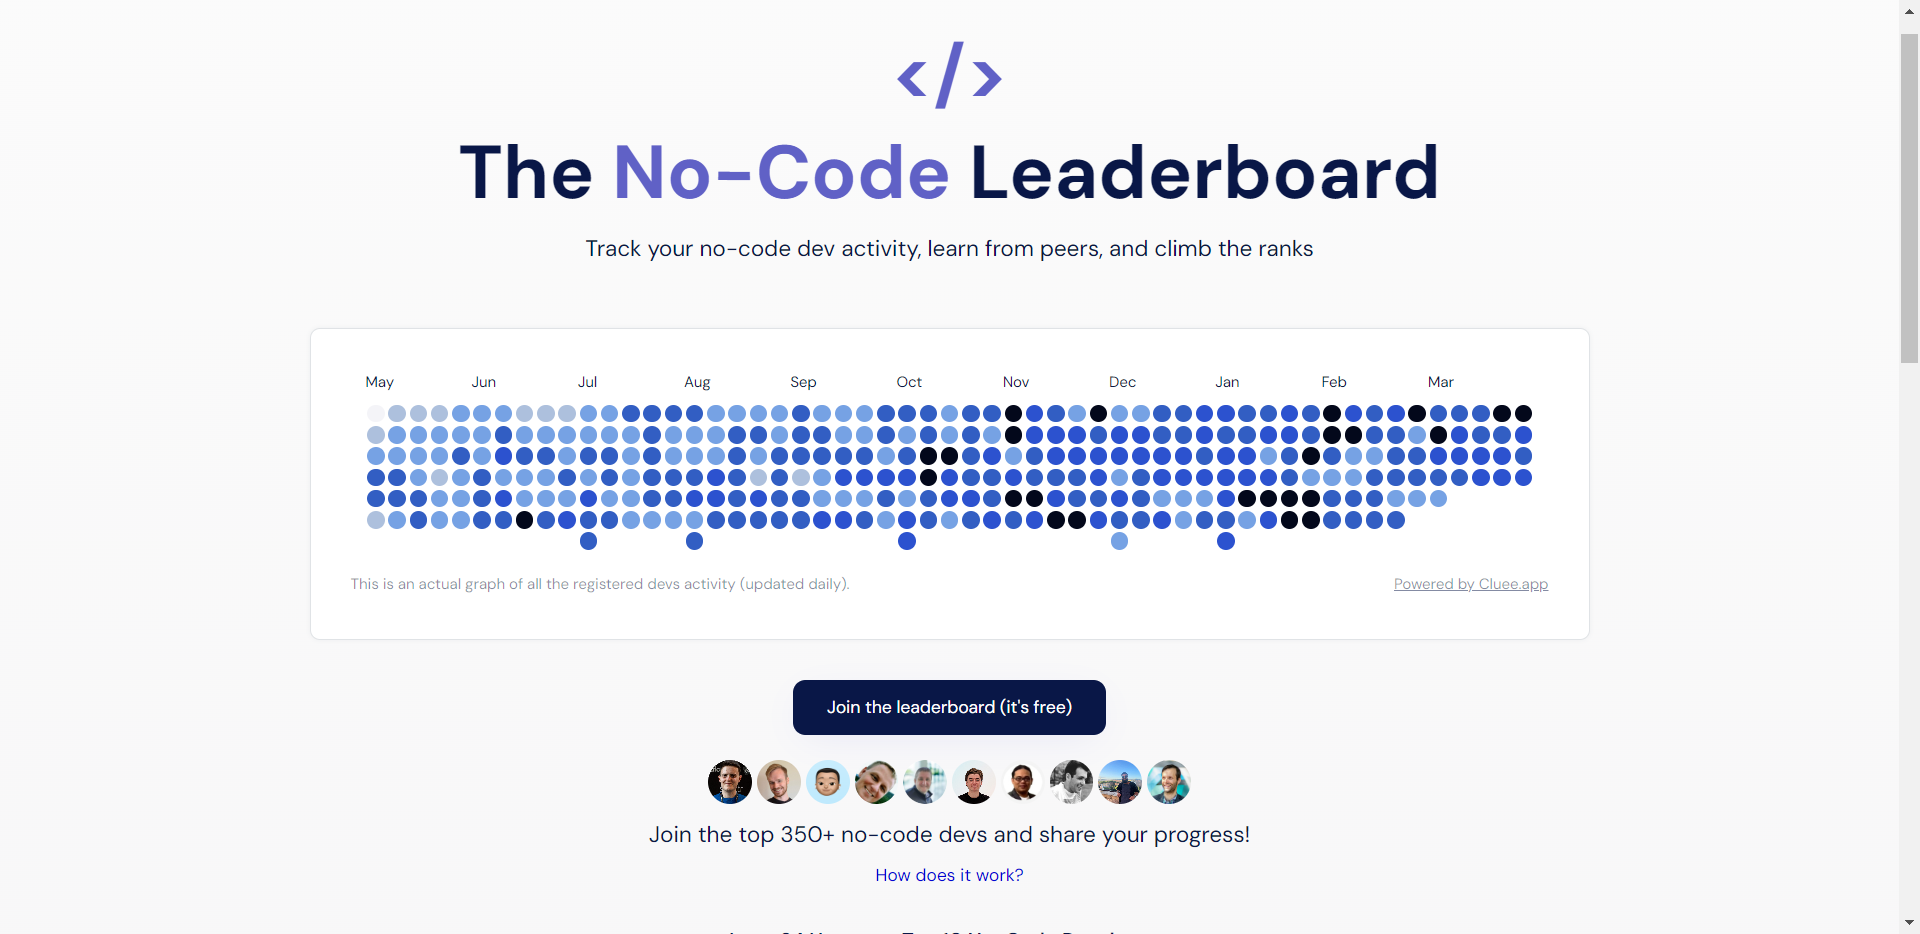 the-no-code-leaderboard - Track your no-code dev activity and climb the ranks